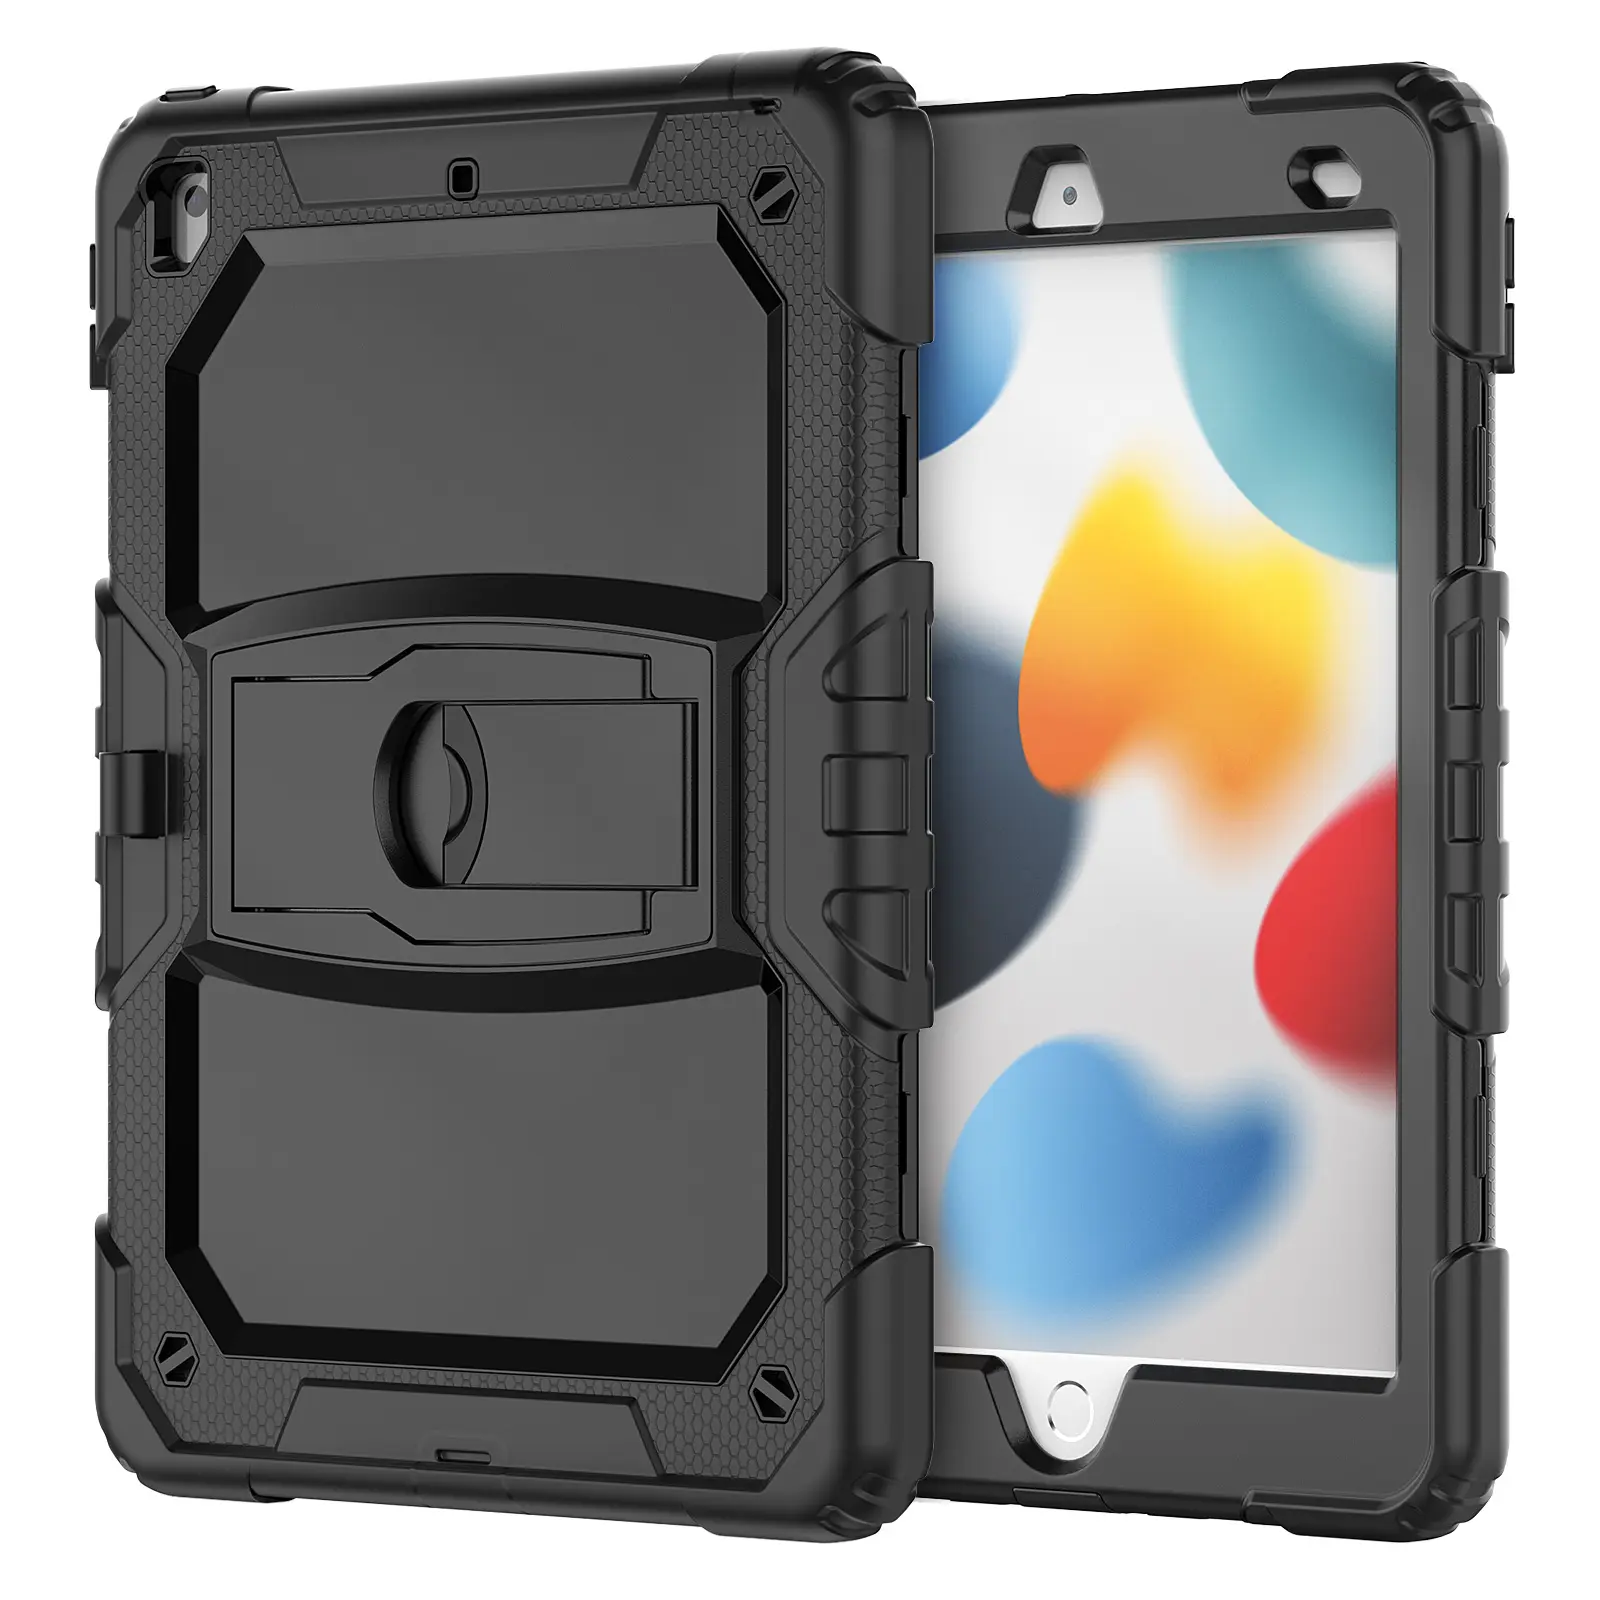 Hard PC Shockproof Silicone Tablet Case For Ipad 9 Protective Cover With Built In Kickstand Case For Ipad 10.2